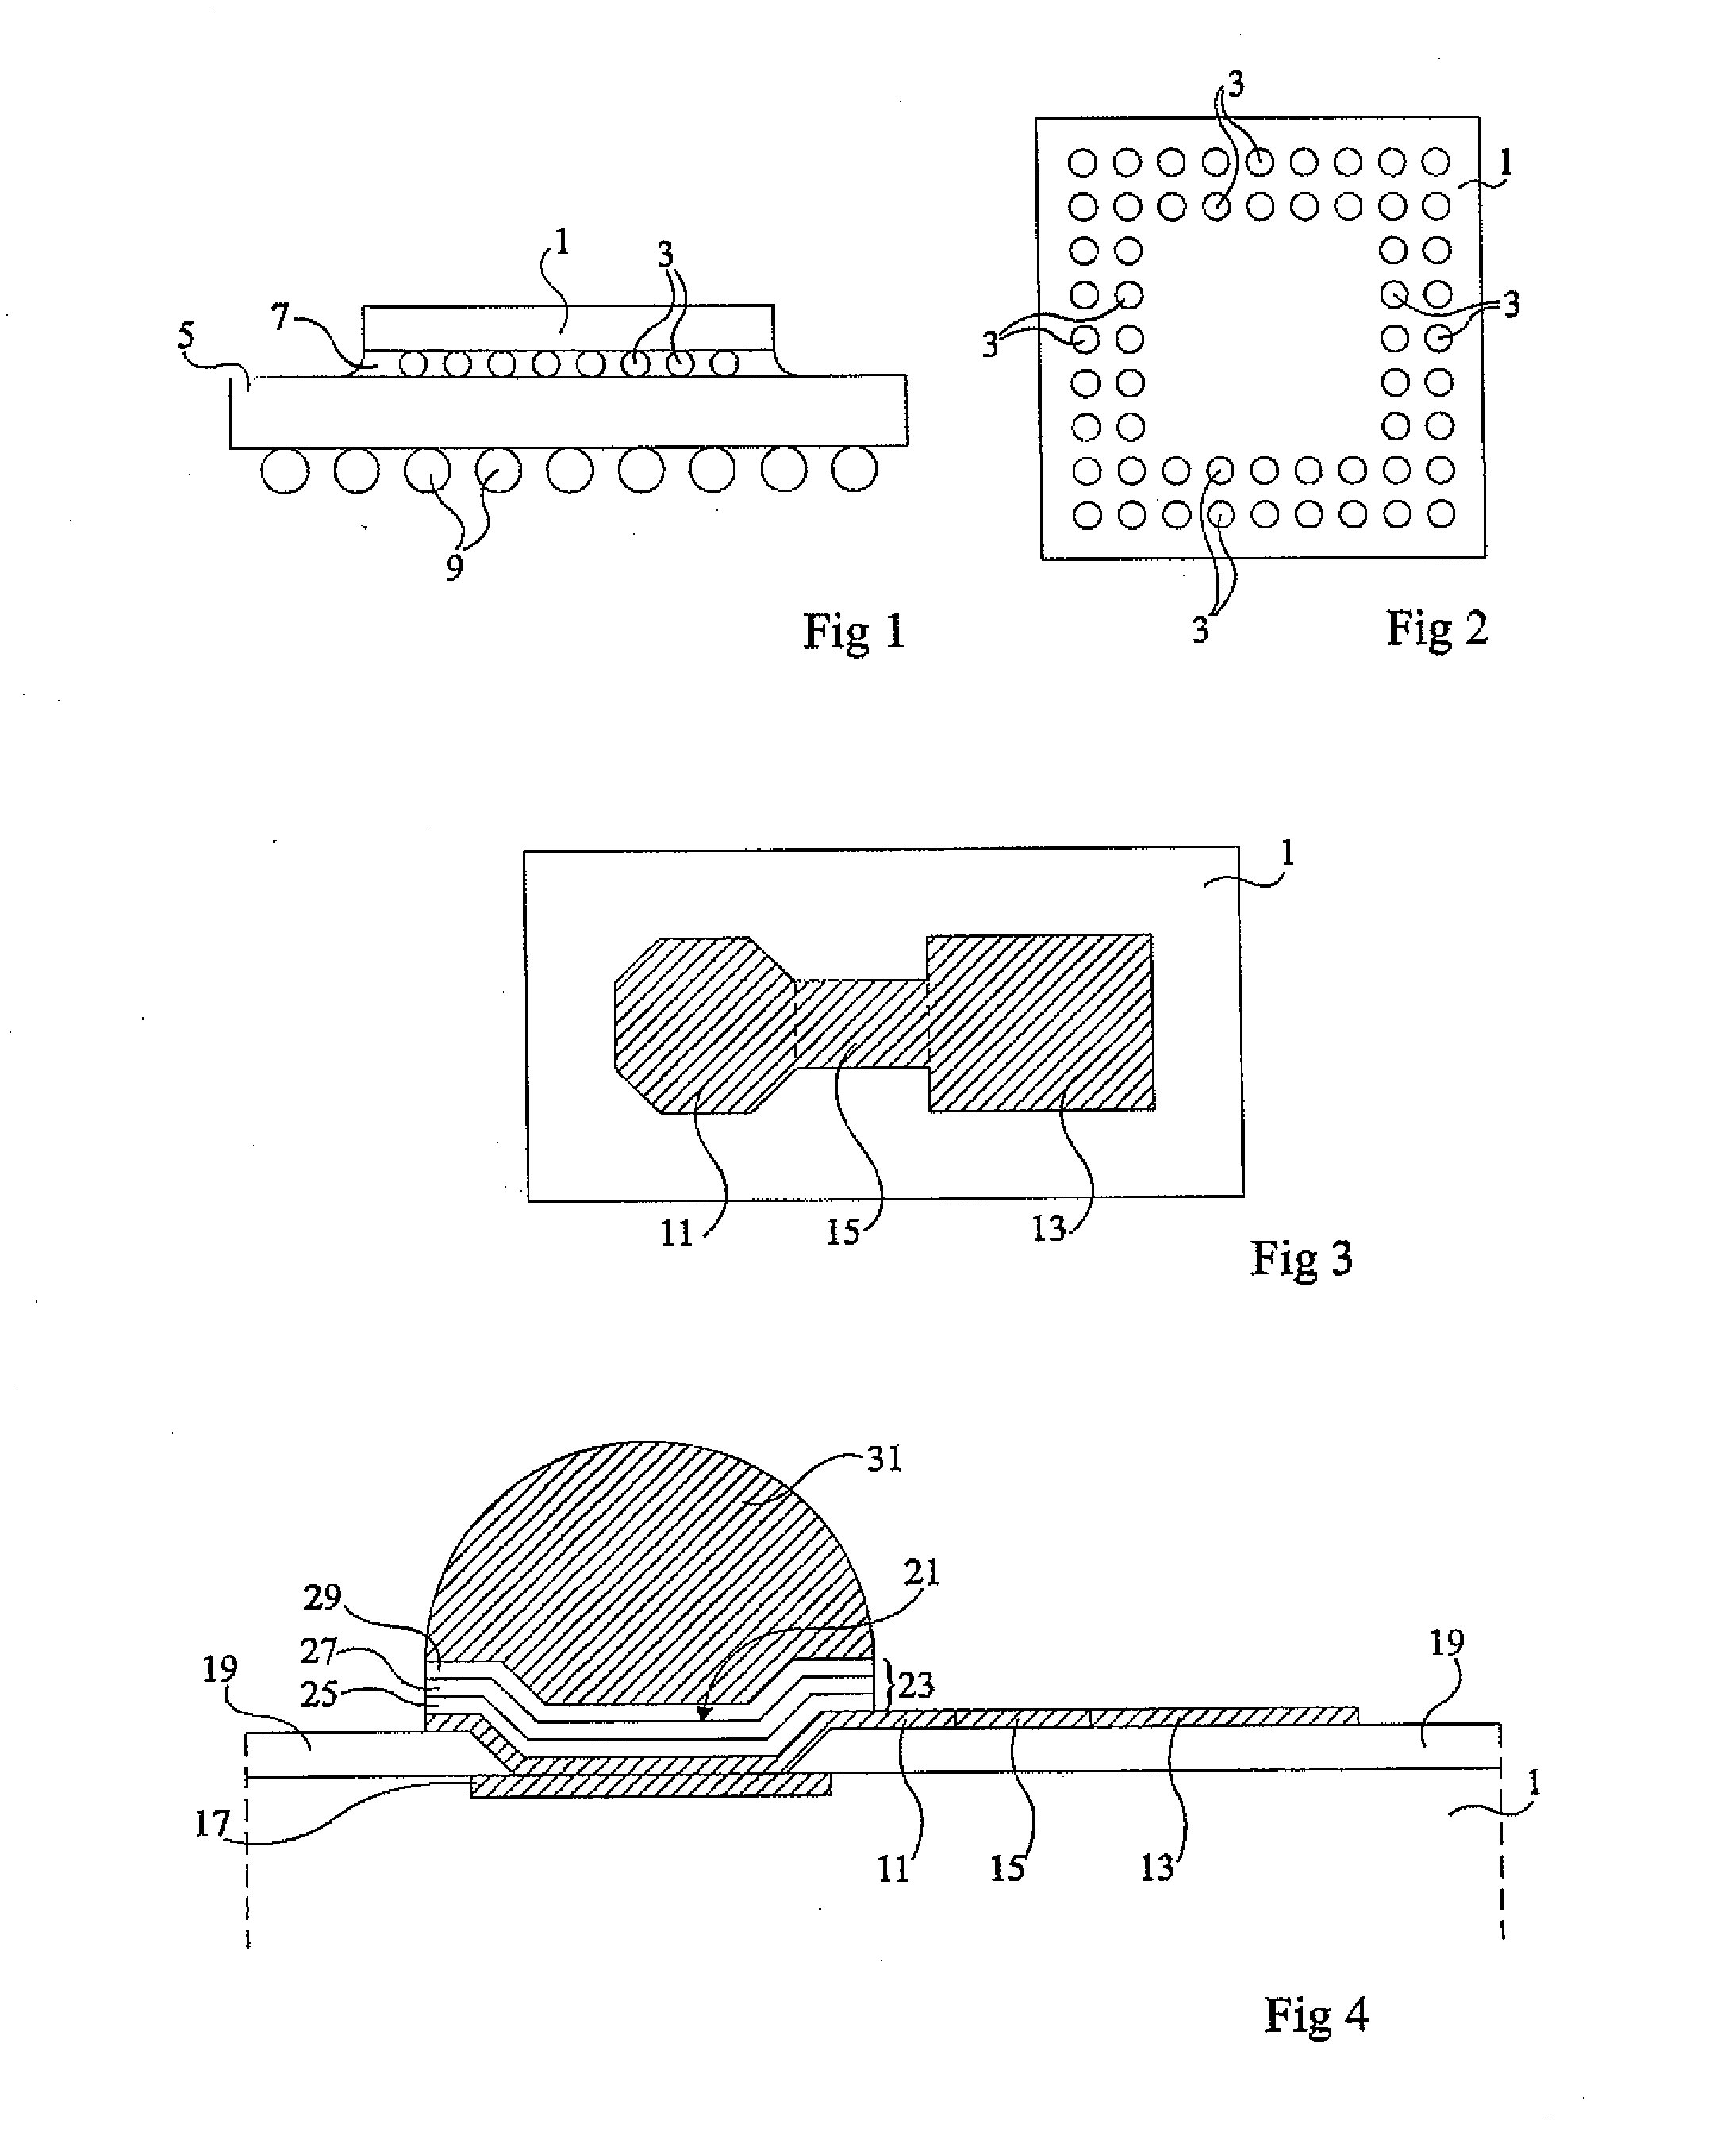 Method for manufacturing and testing an integrated electronic circuit